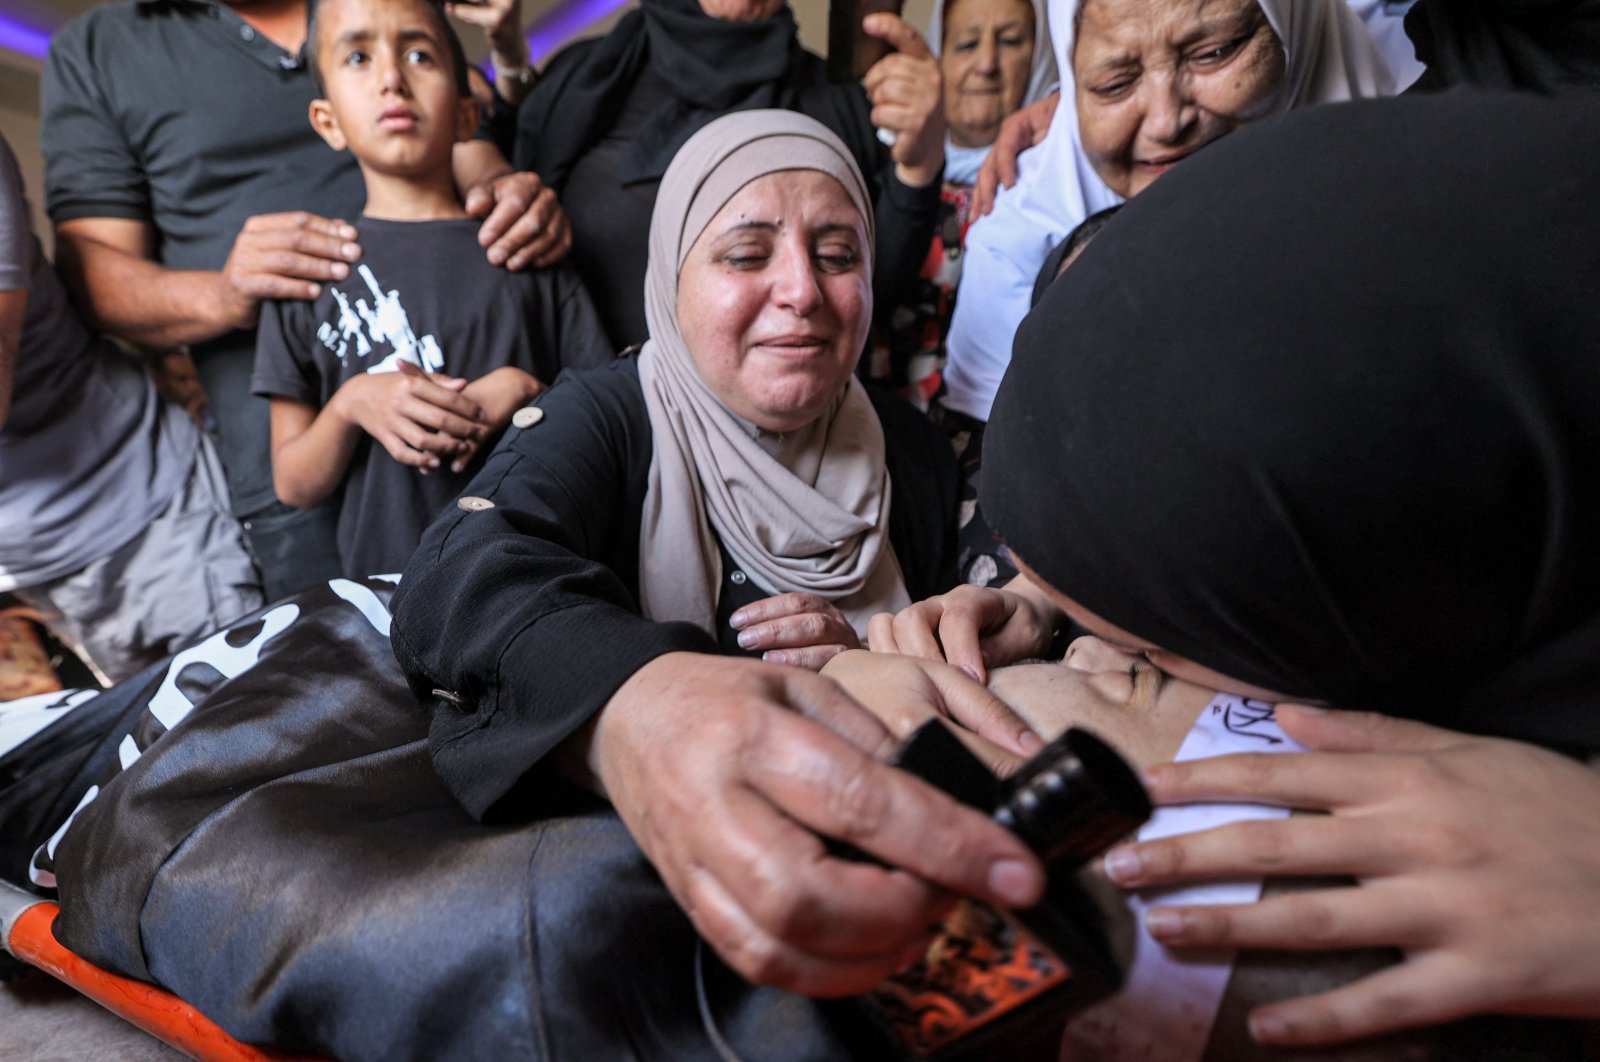 The mother (top) and sisters (bottom) of Palestinian Baraa Lahlouh, 24, one of three Palestinians killed during an operation by Israeli forces in Jenin, react to his body as it arrives at their home in the Jenin camp, West Bank, the occupied Palestine, June 17, 2022. (AFP Photo)